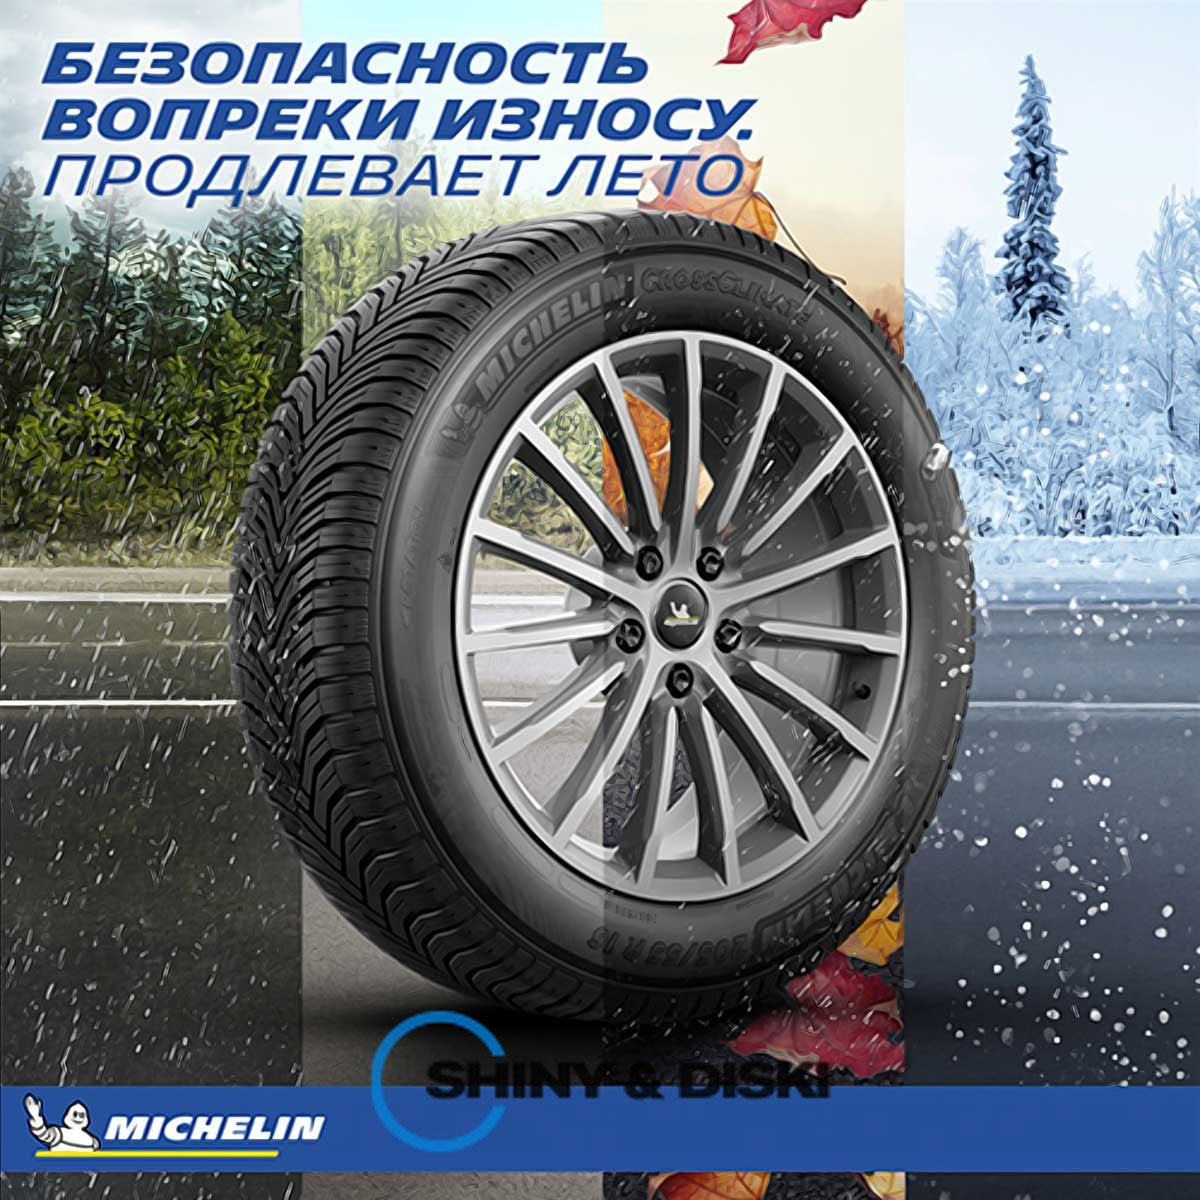 покрышки michelin cross climate+ 195/55 r16 91v